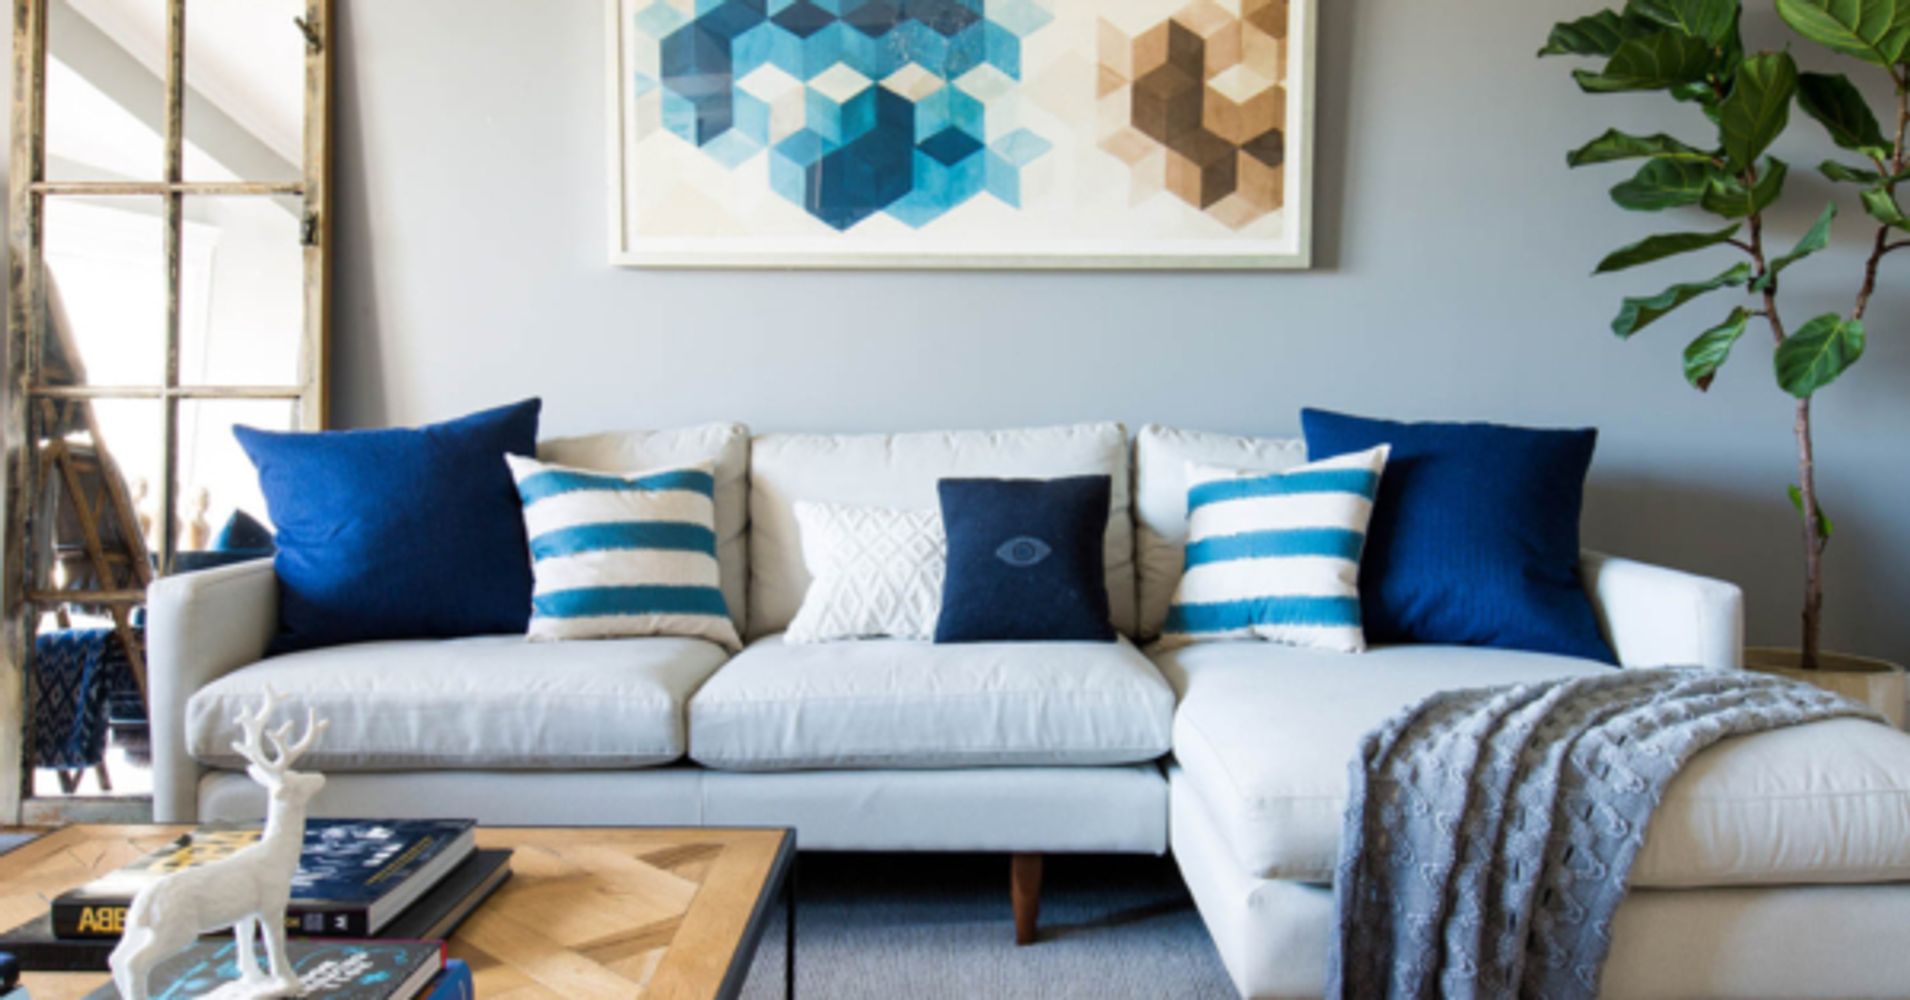 So What Exactly Is Online Interior Design? HuffPost